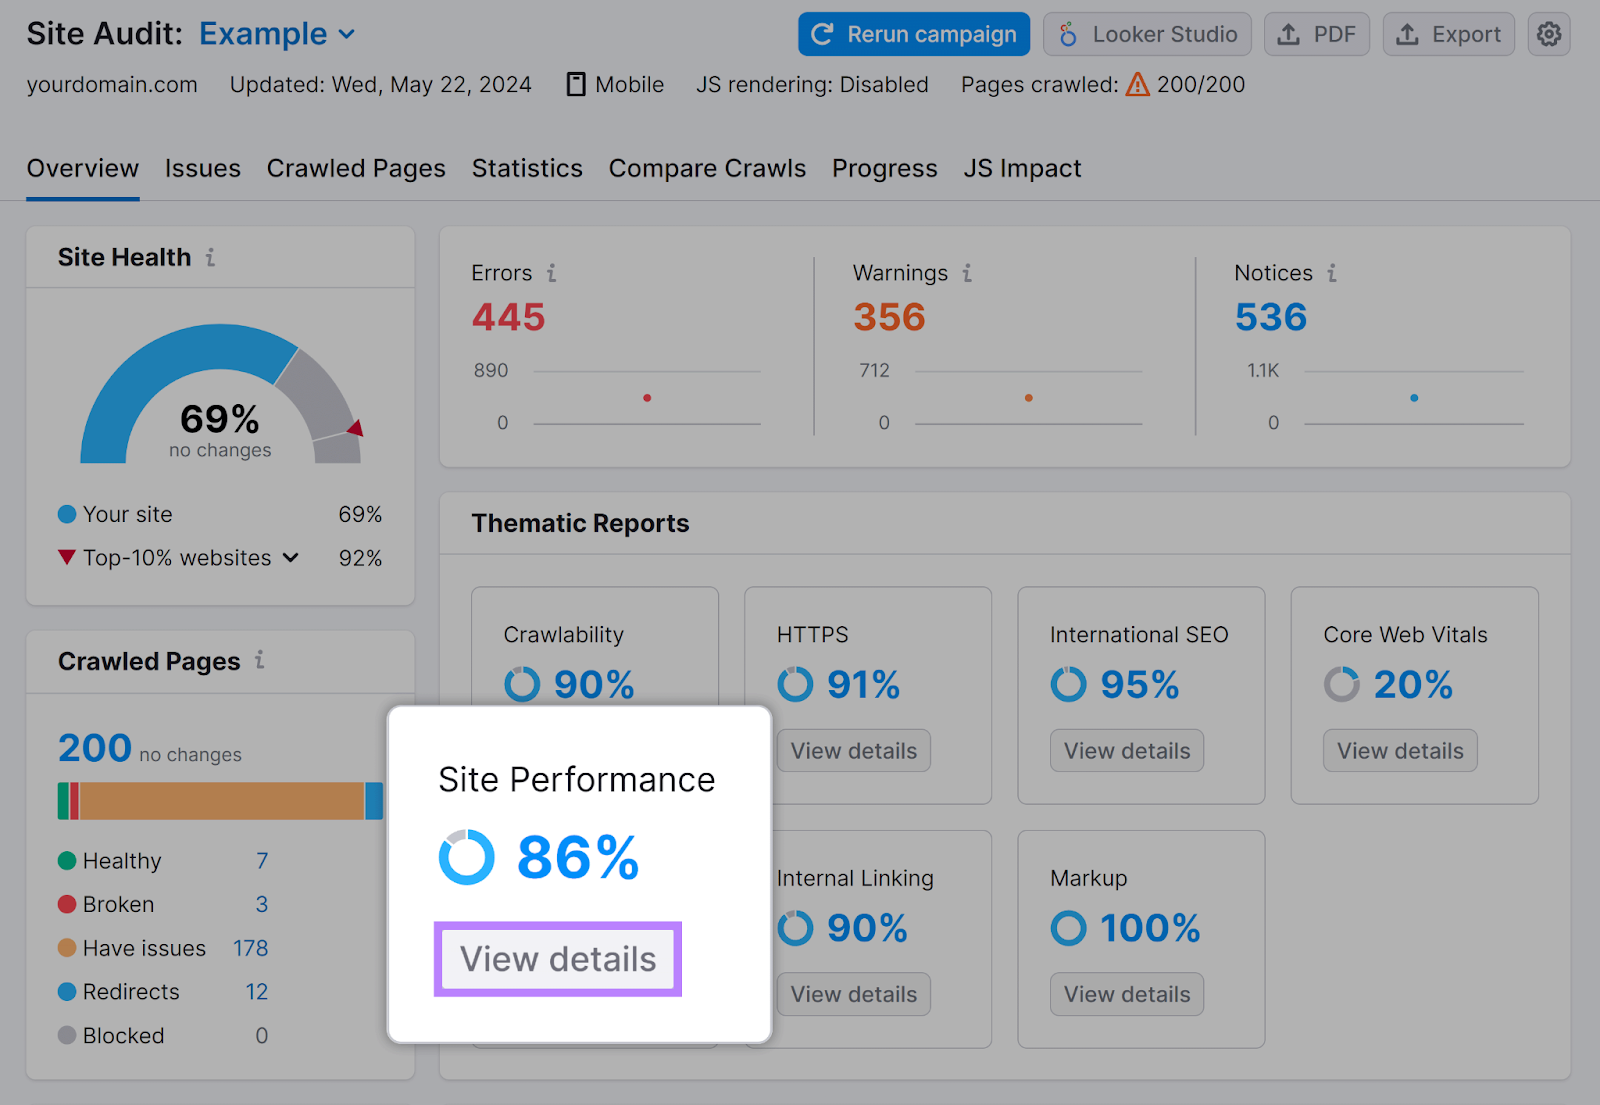 Site Audit Overview report with Site Performance section and View details button highlighted.